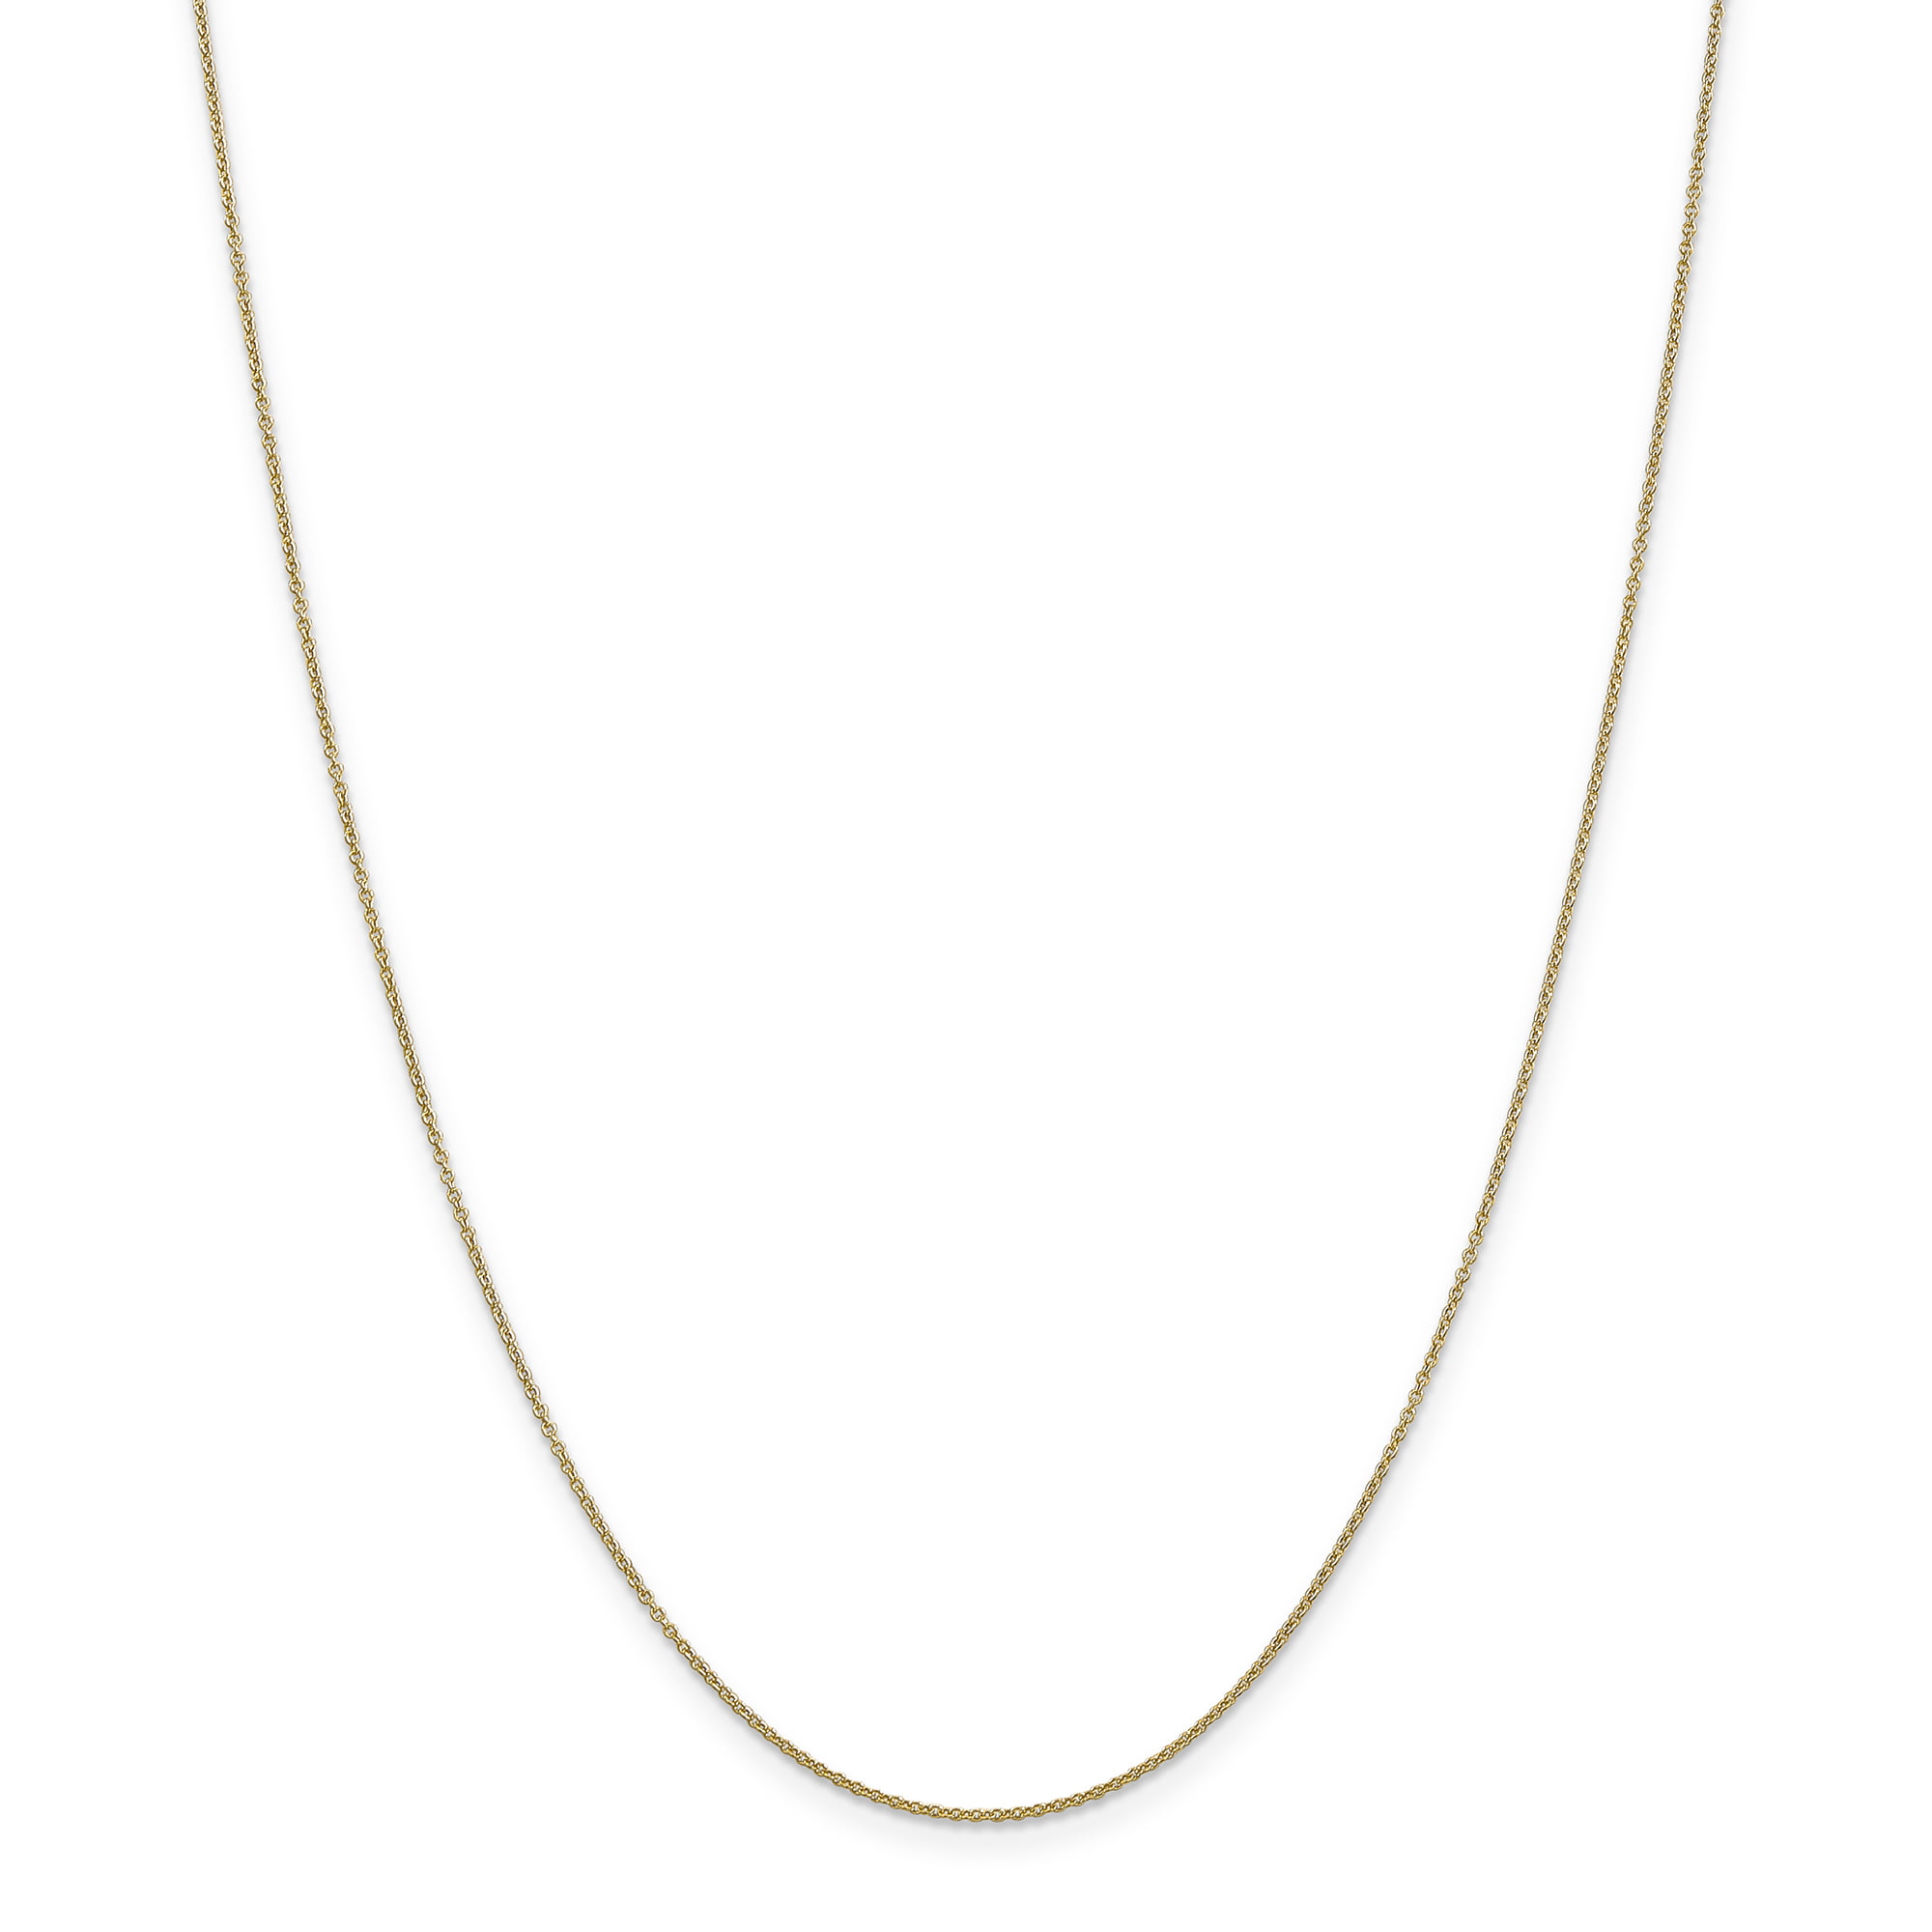 Roy Rose Jewelry 14K Rose Gold 1mm Box Link Chain Necklace ~ Length 18'' inches